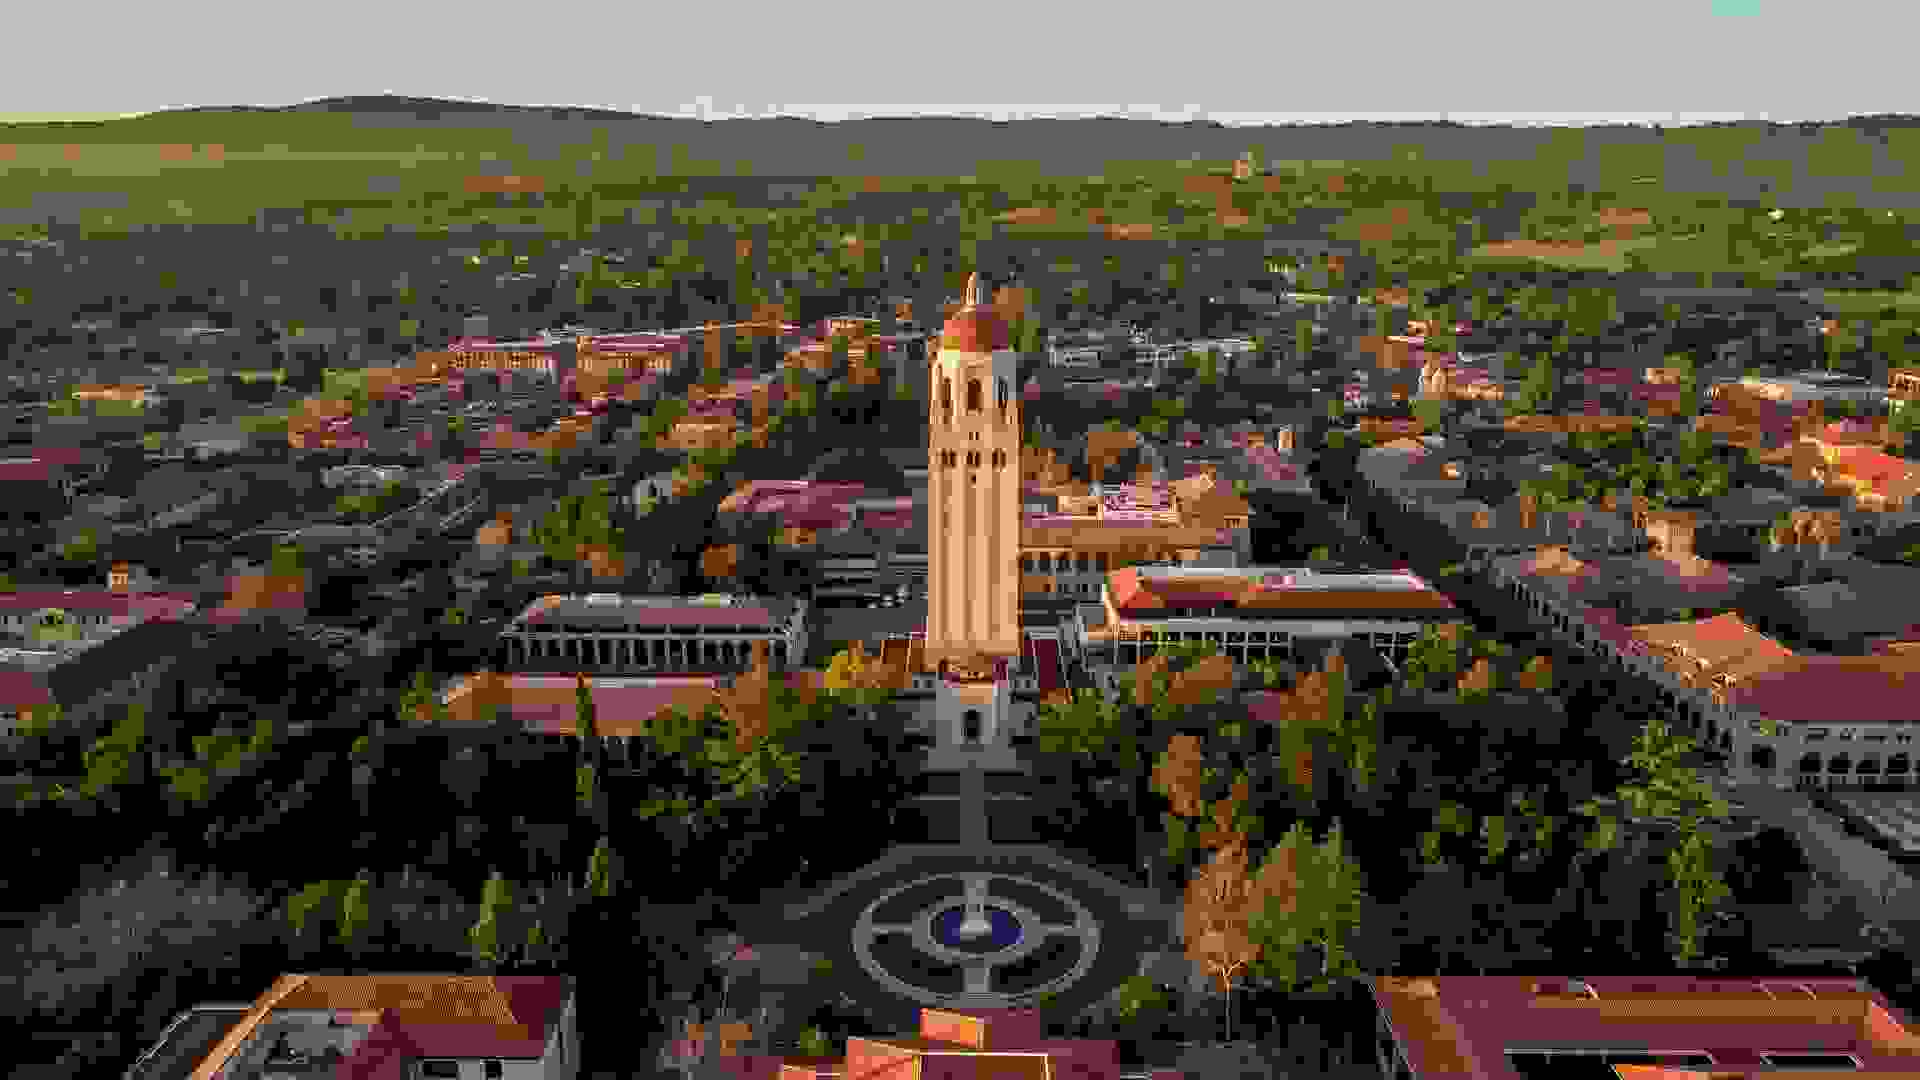 Stanford, California, USA - March 17, 2019: Aerial view of Stanford University in Stanford California.